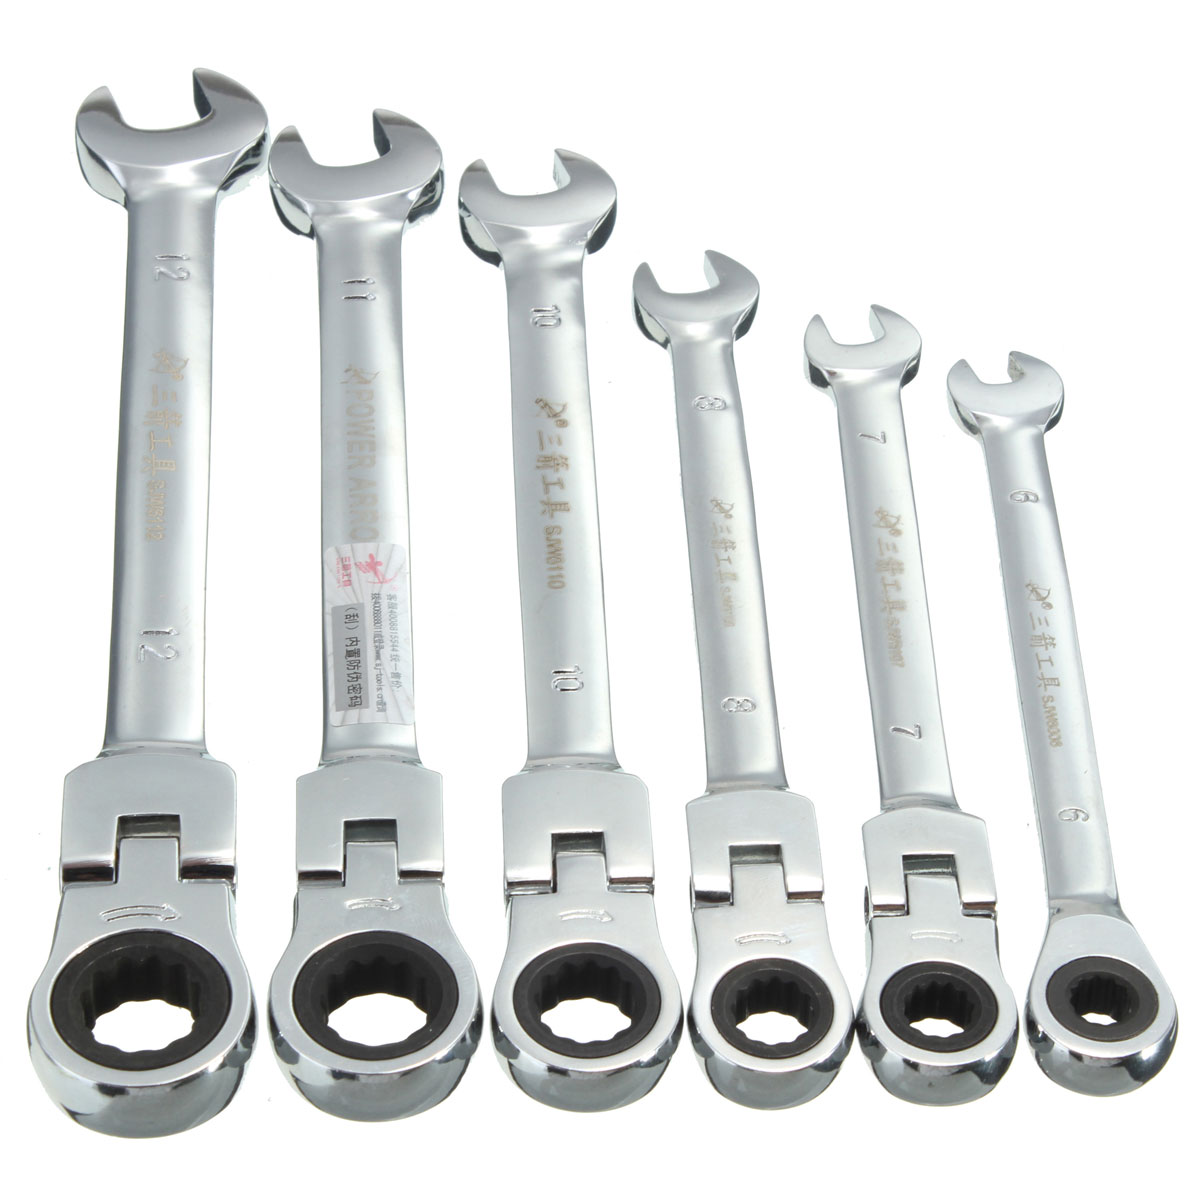 

Flexible Pivoting Head Ratchet Combination Spanner Wrench Garage Metric Tool